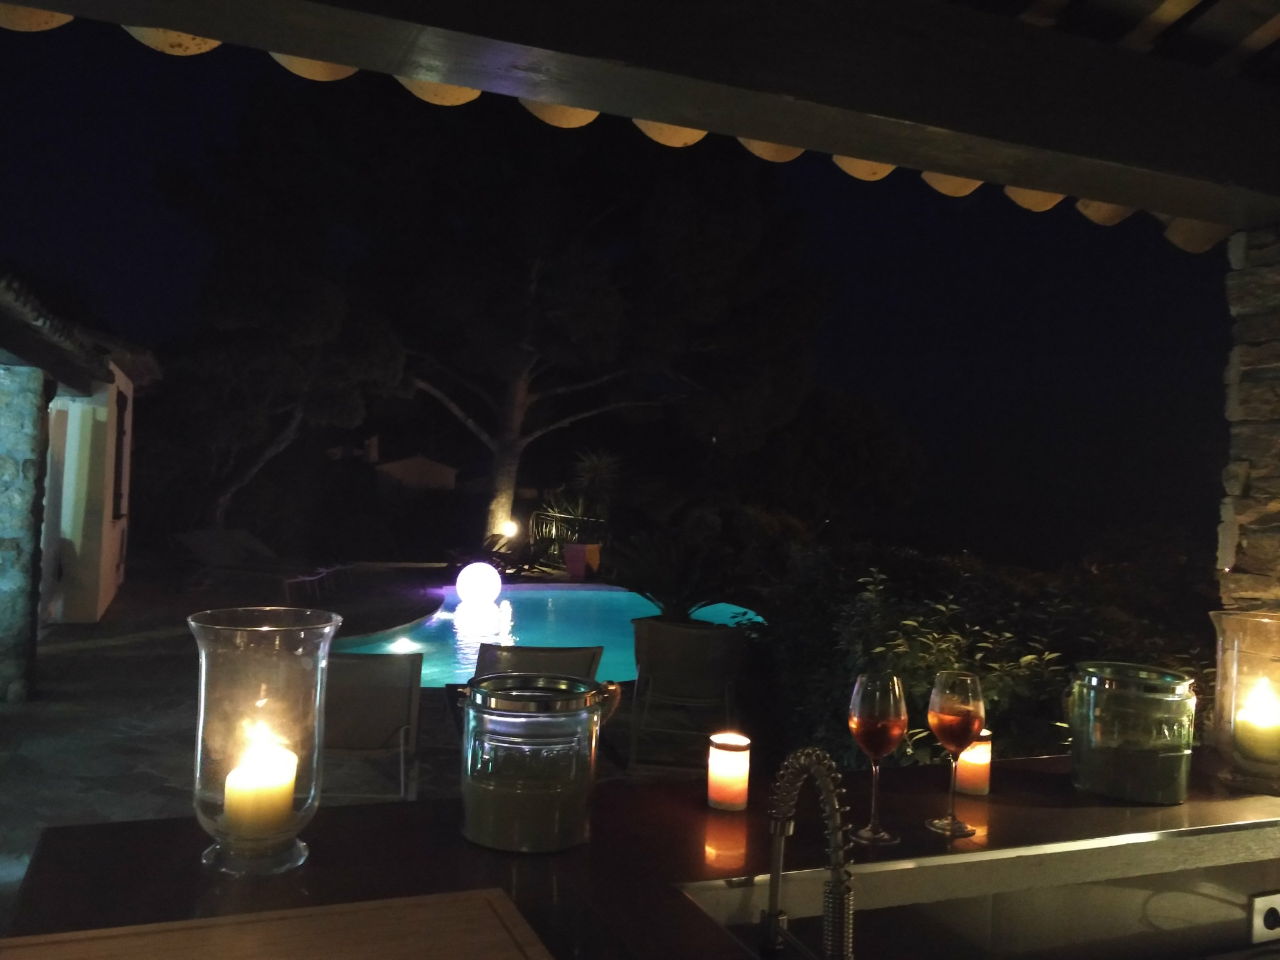  The outdoor kitchen by night